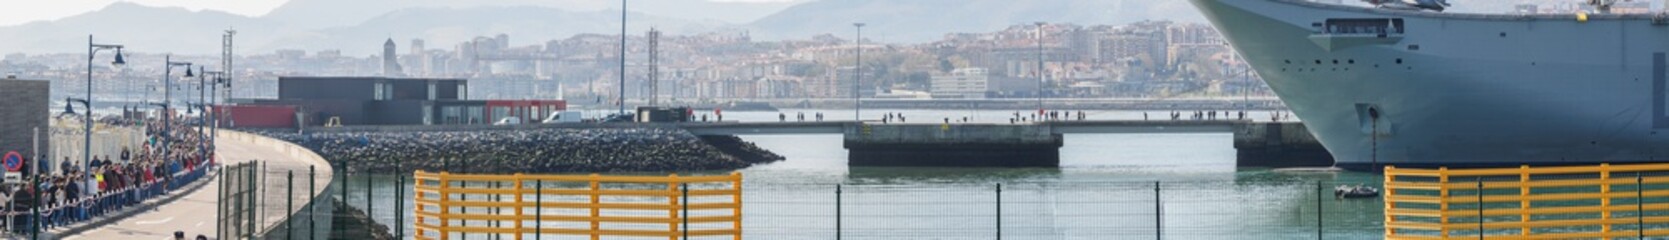 BILBAO, SPAIN - MARCH / 23/2019. The aircraft carrier of the Spanish Navy Juan Carlos I in the port of Bilbao, open day to visit the ship. Sunny day